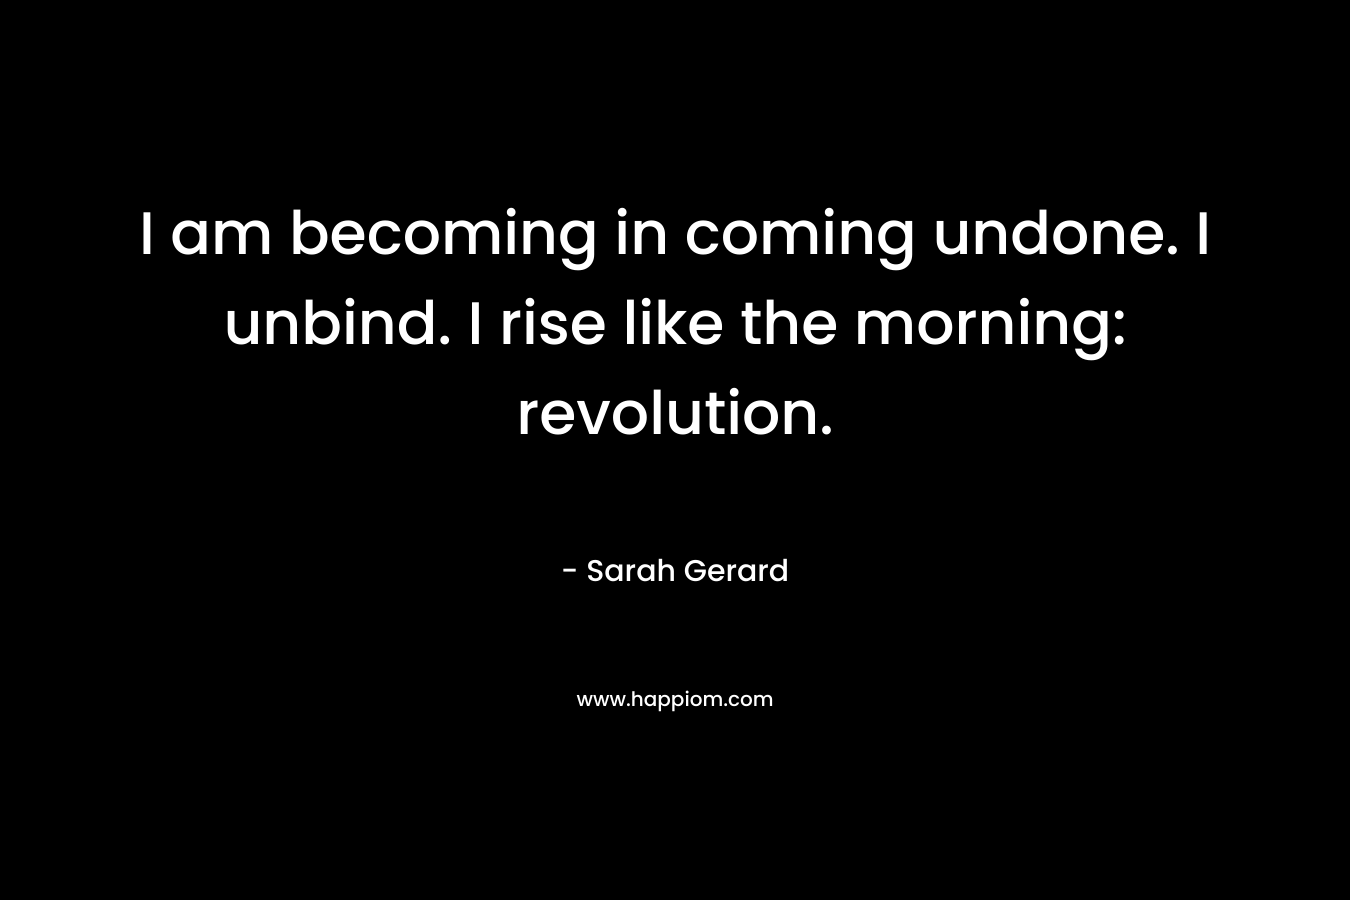 I am becoming in coming undone. I unbind. I rise like the morning: revolution. – Sarah Gerard